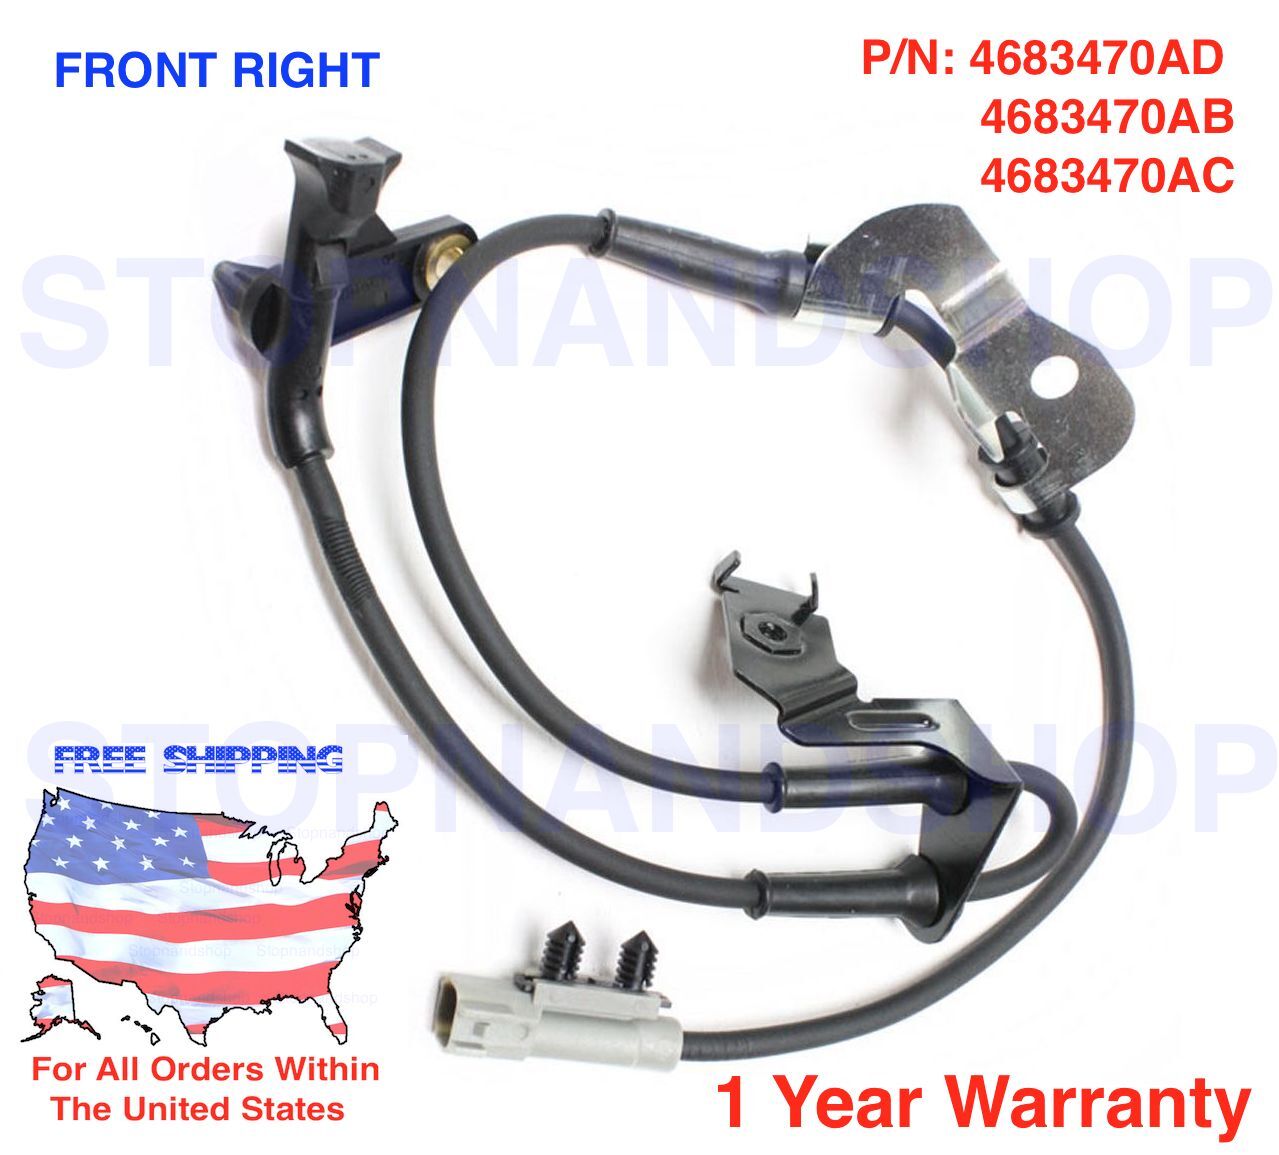 NEW ABS Wheel Speed Sensor FITS GRAND CARAVAN TOWN & COUNTRY Front Passenger 